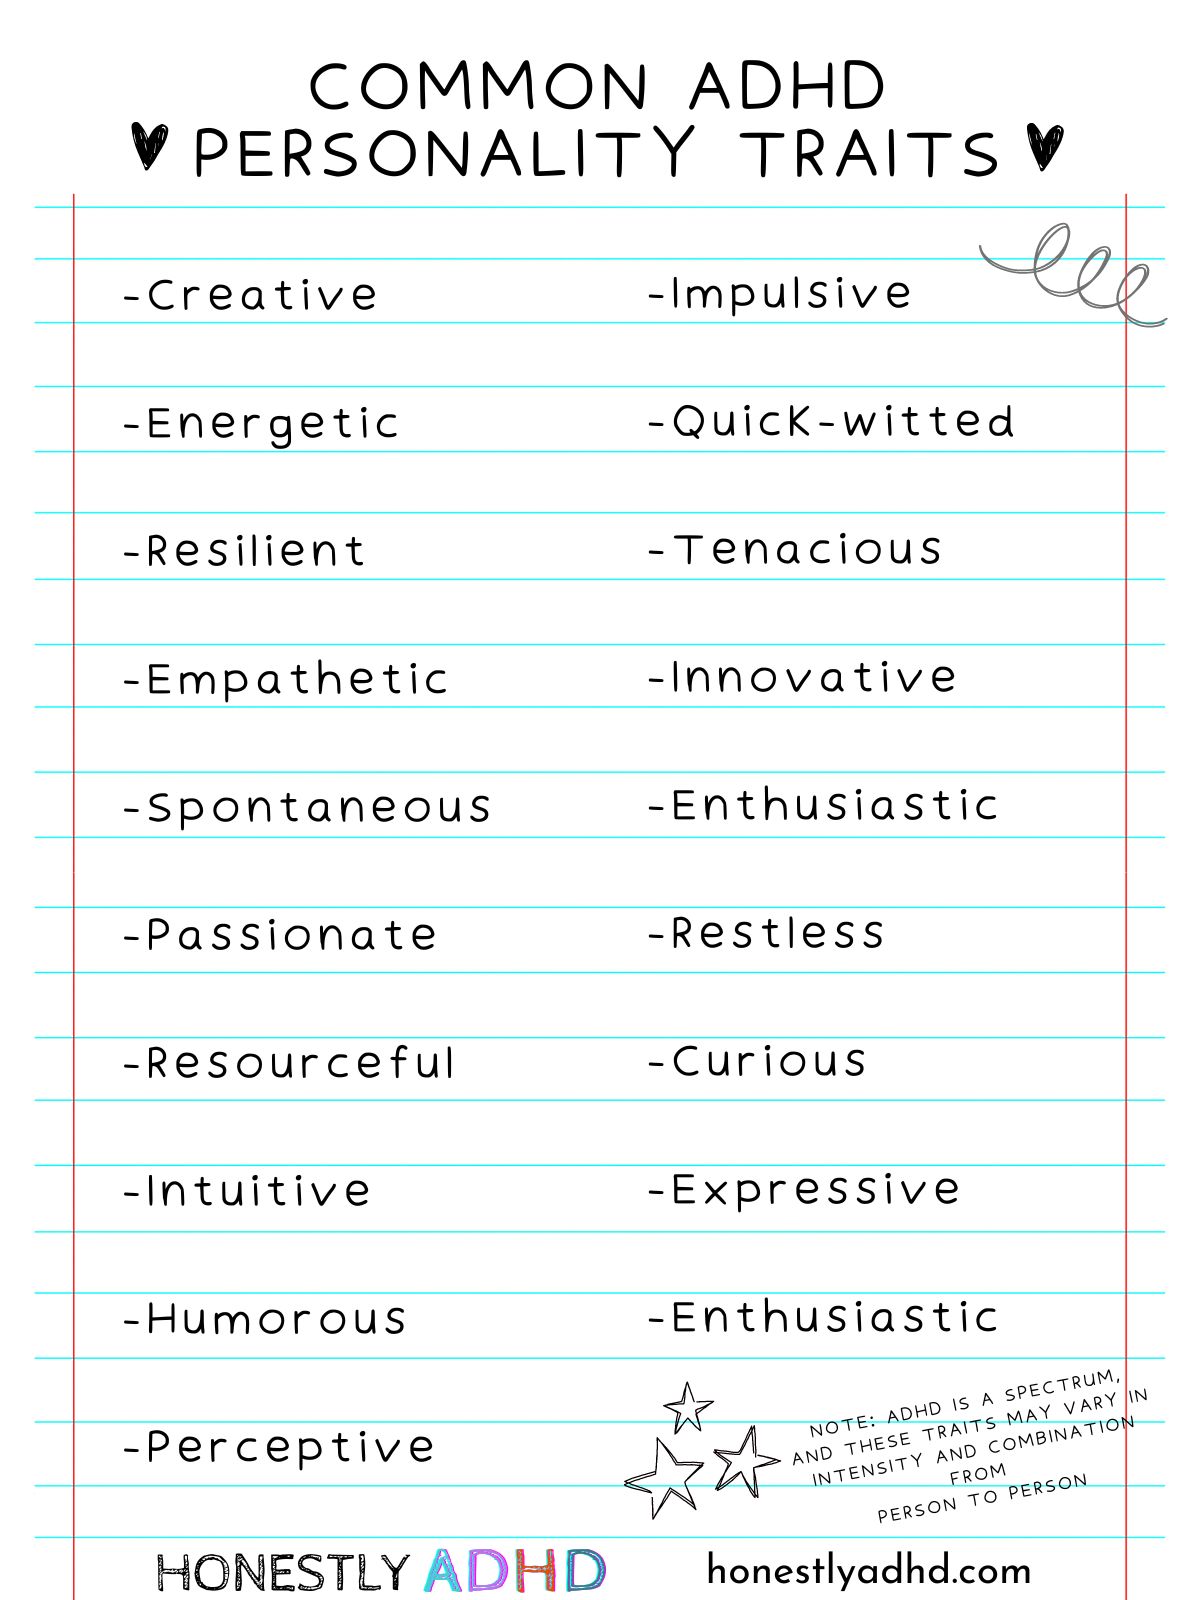 A list of common adhd personality traits.